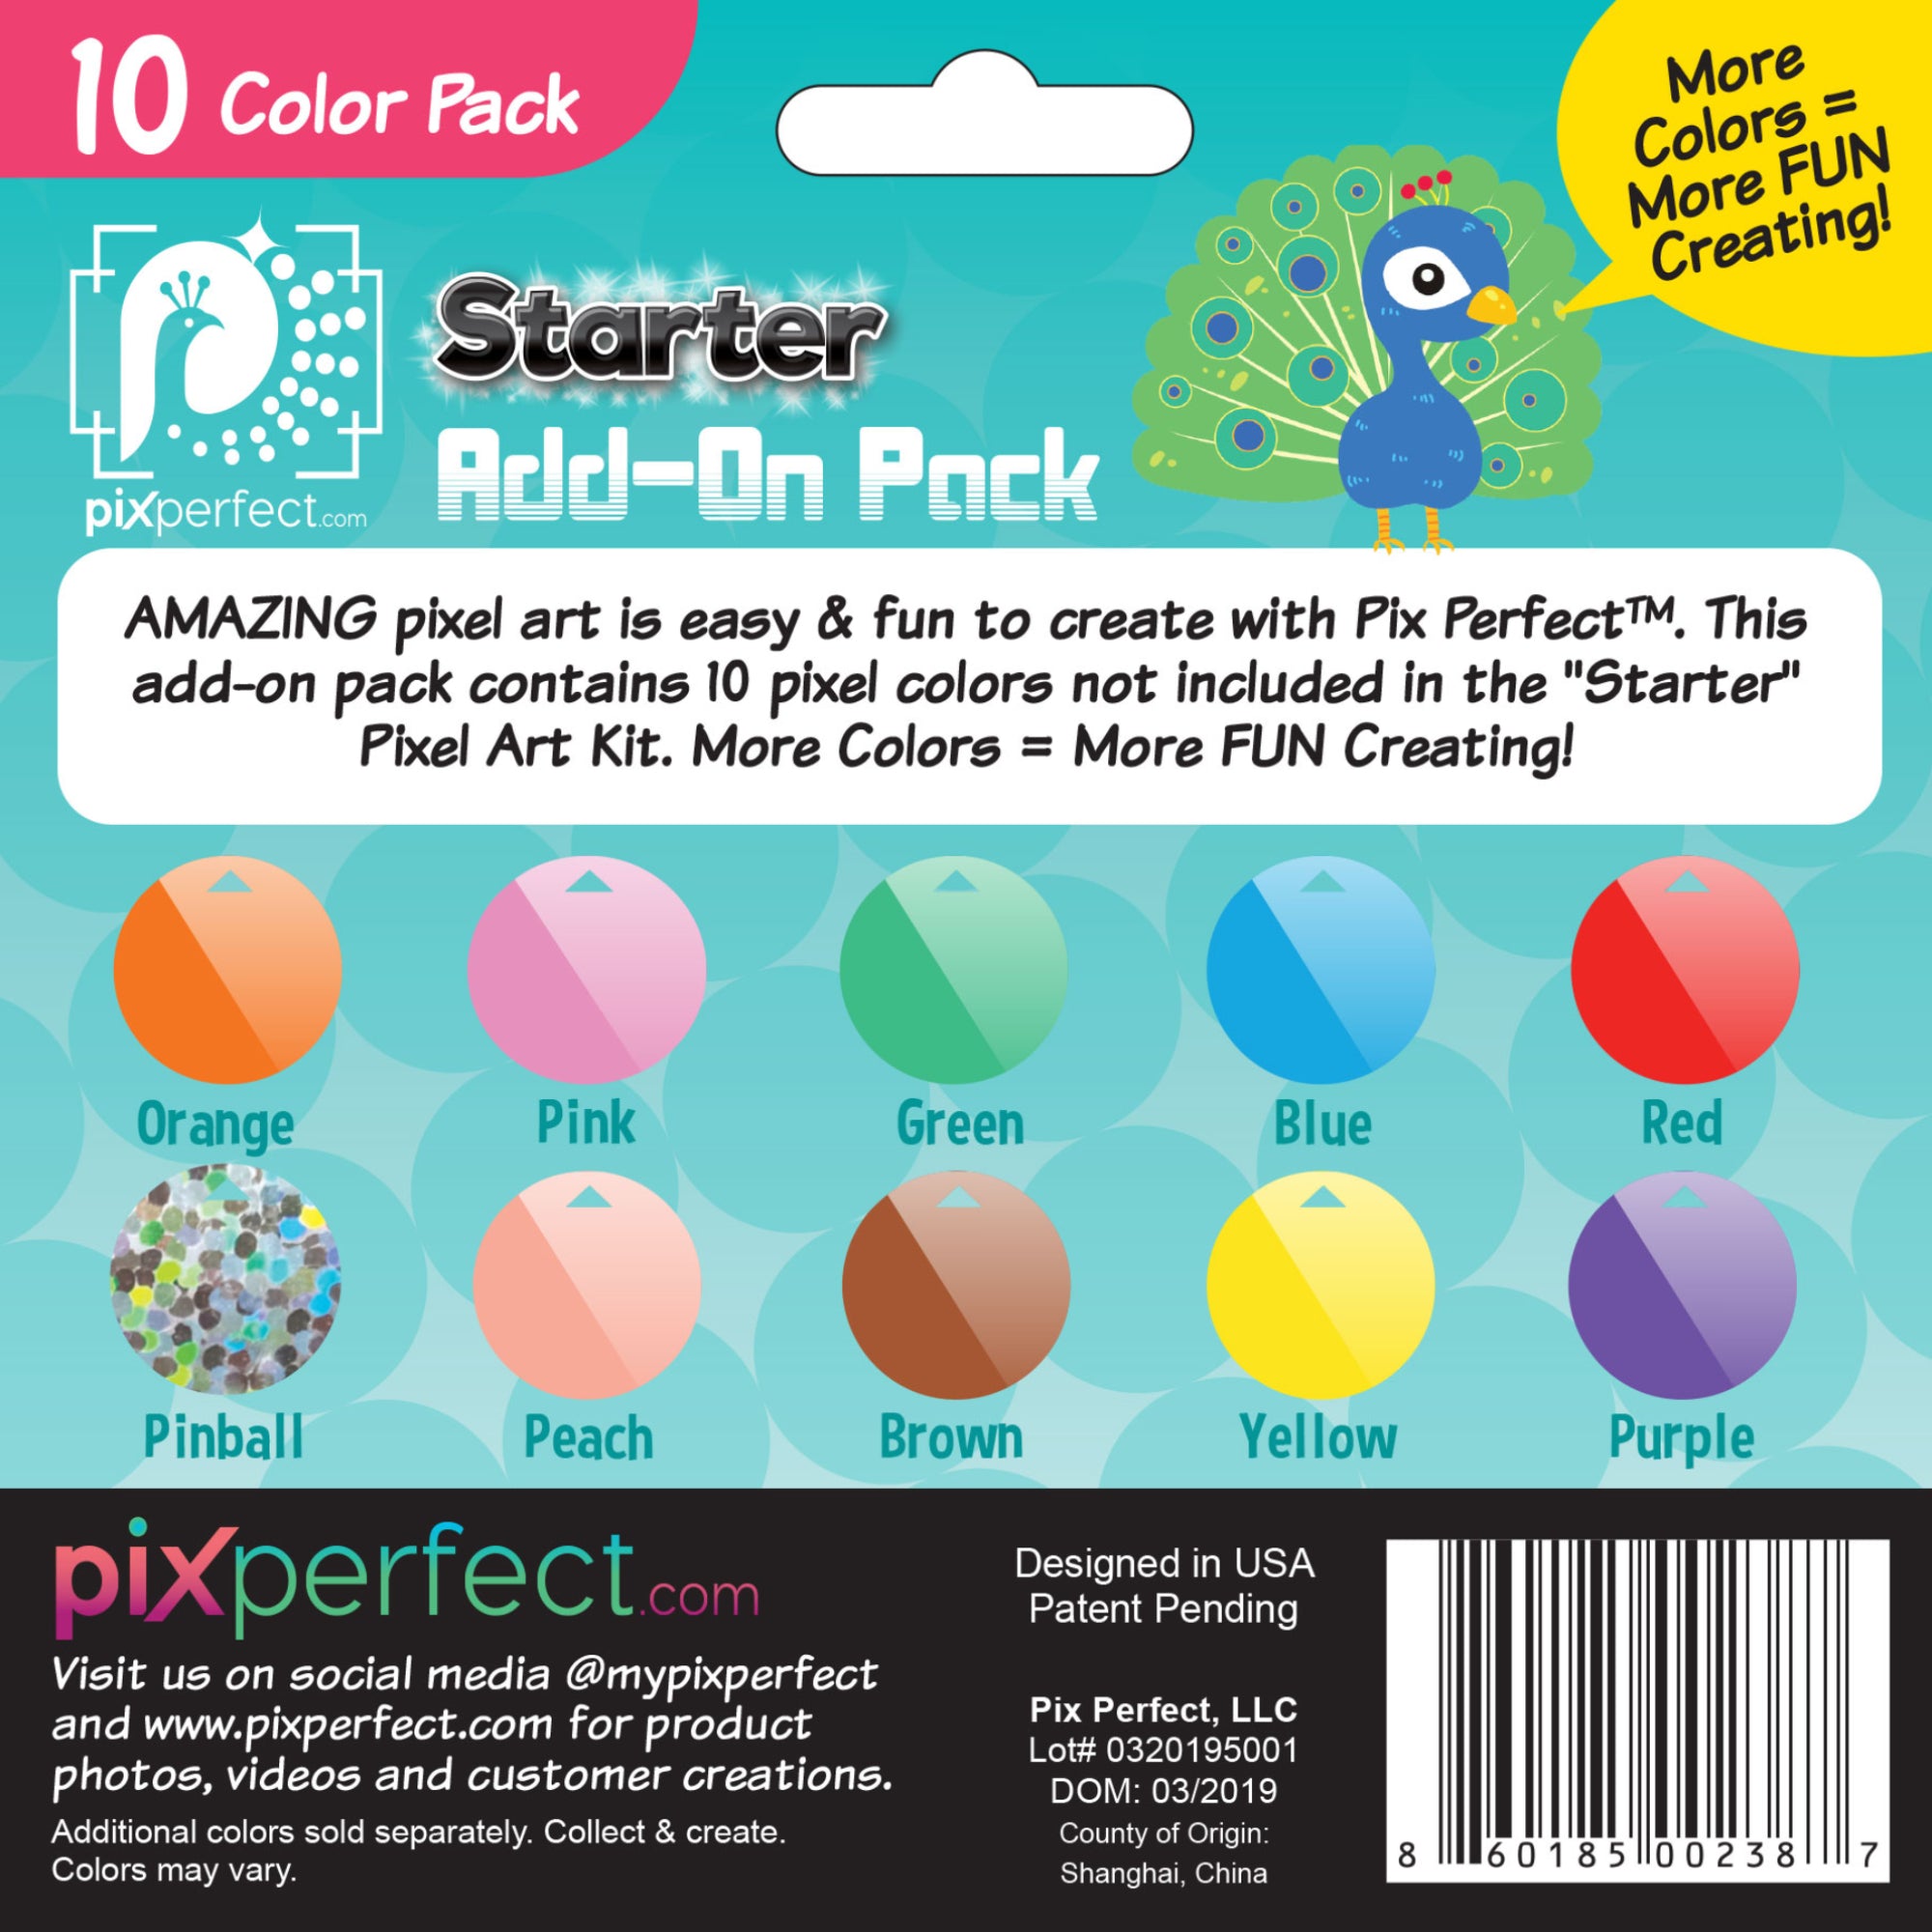 10 Color Add-On Pack